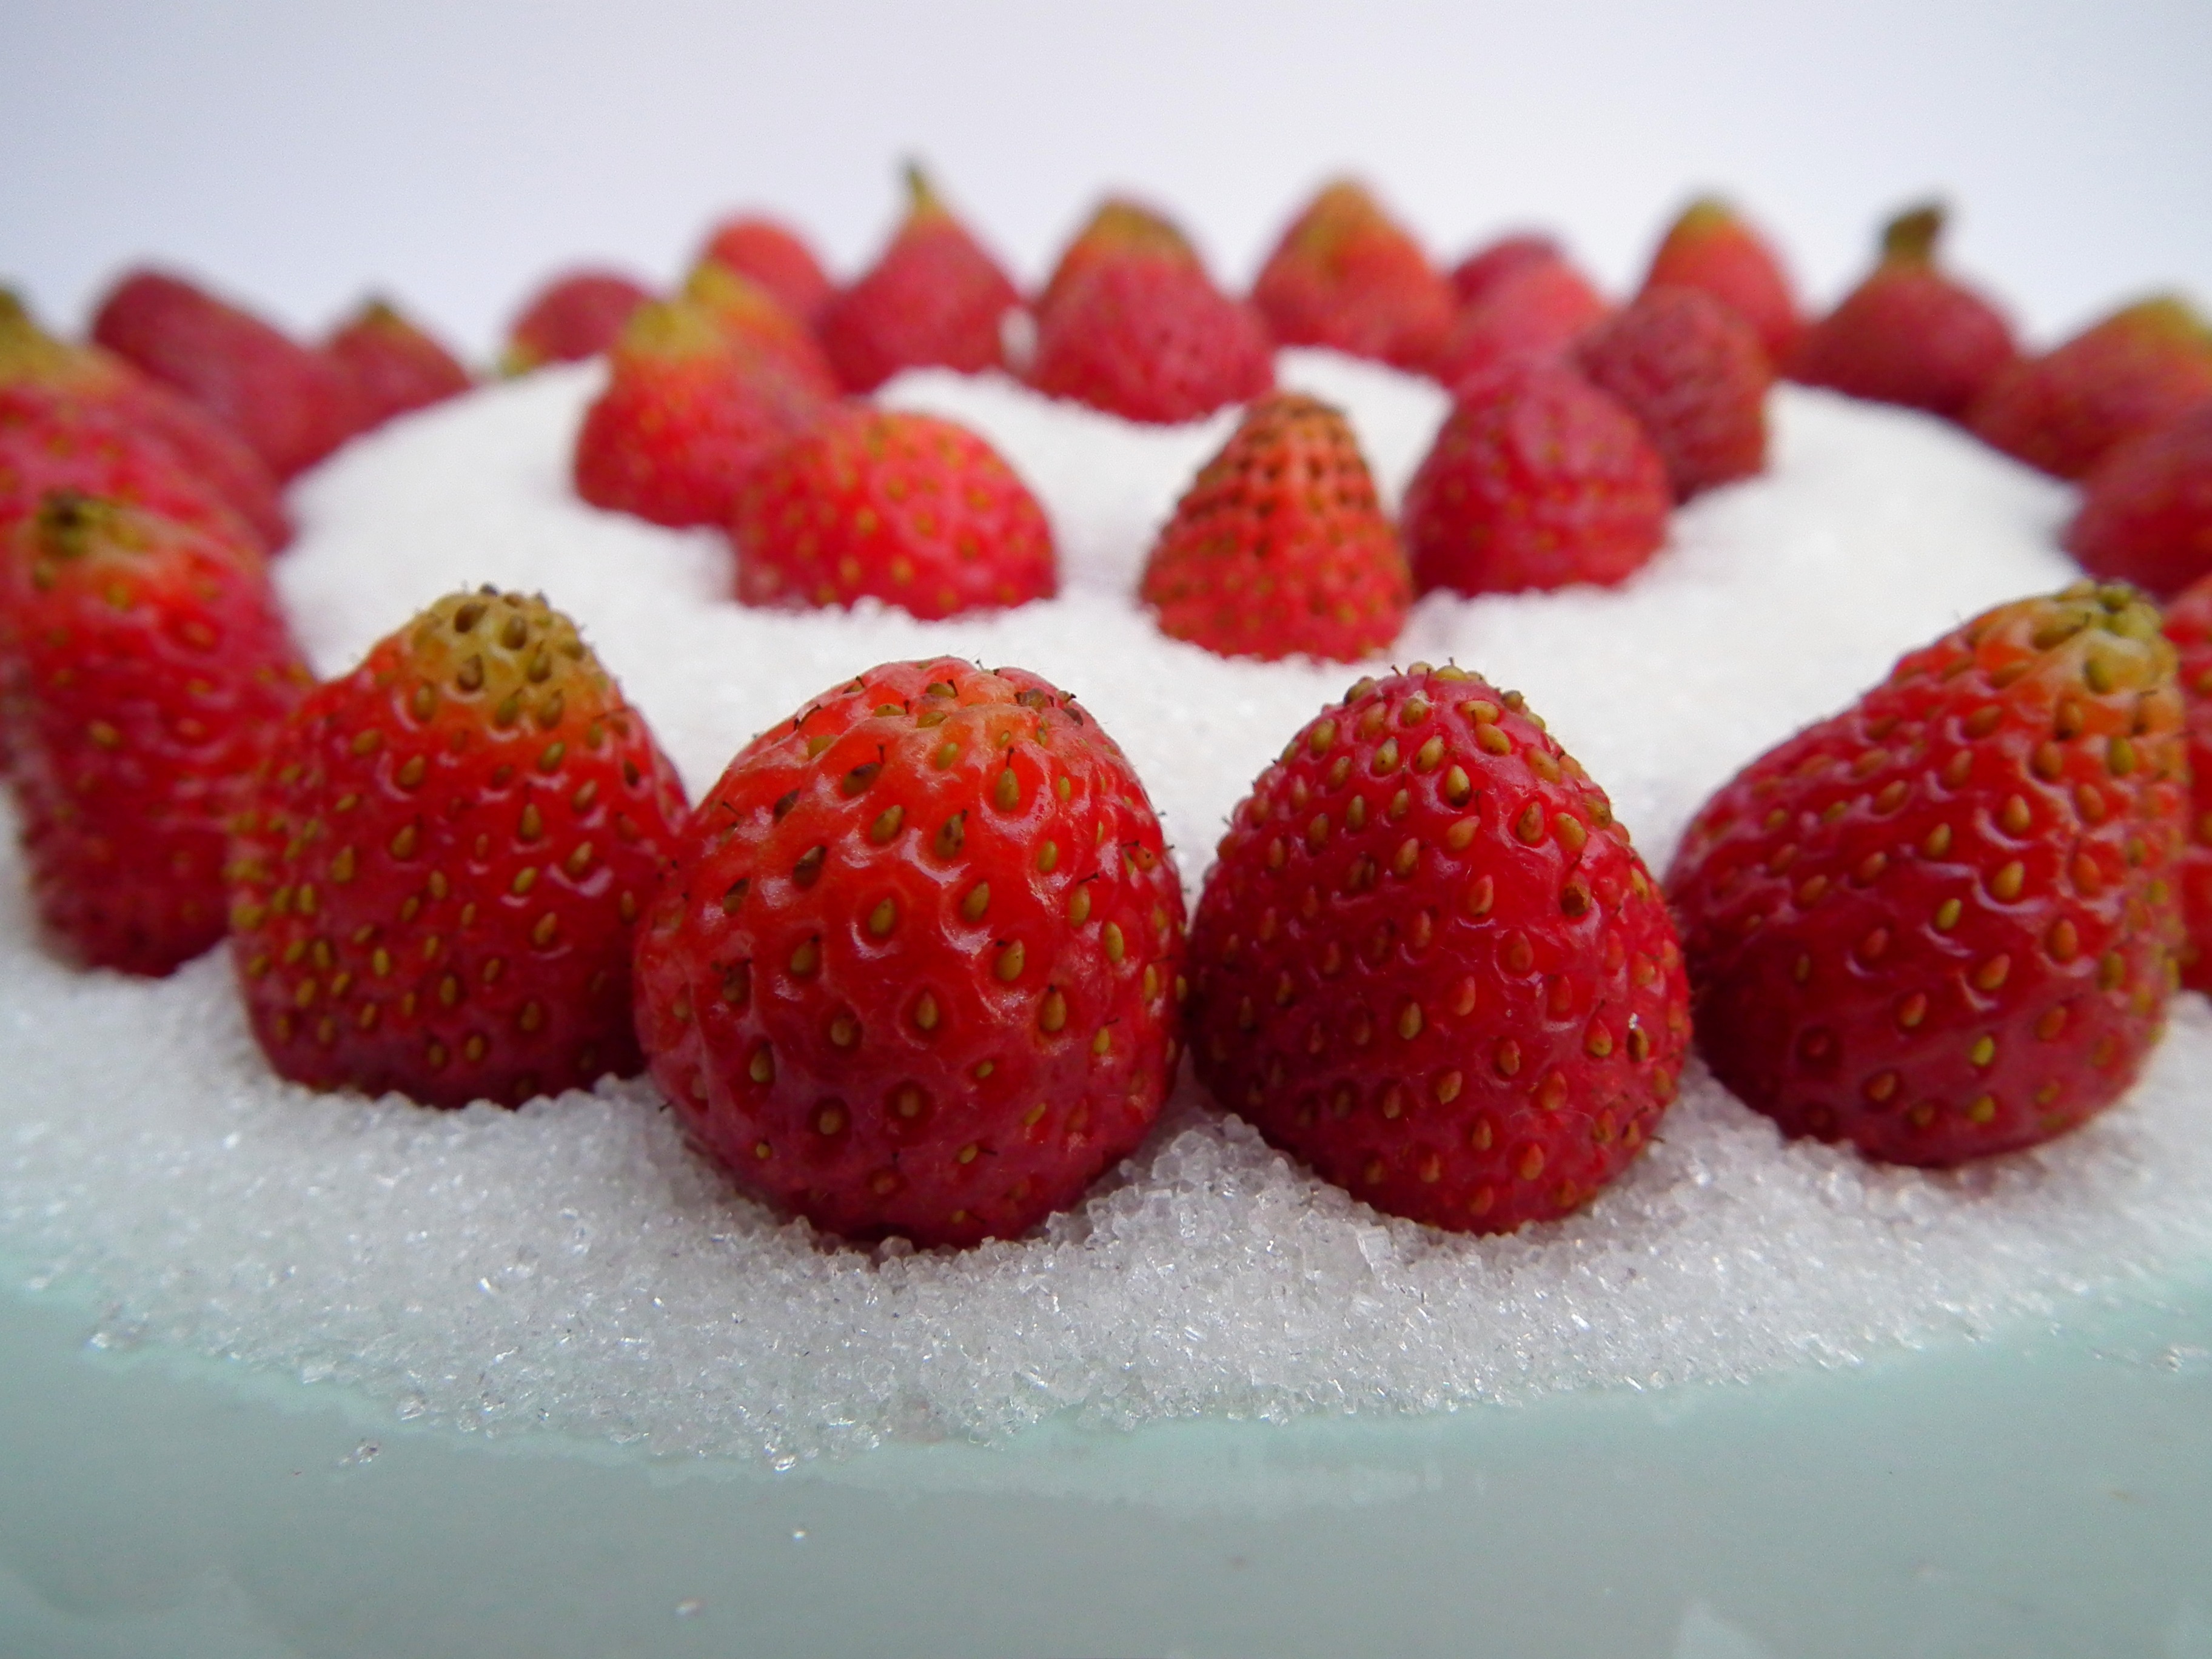 Wallpapers strawberry fruits sugar on the desktop